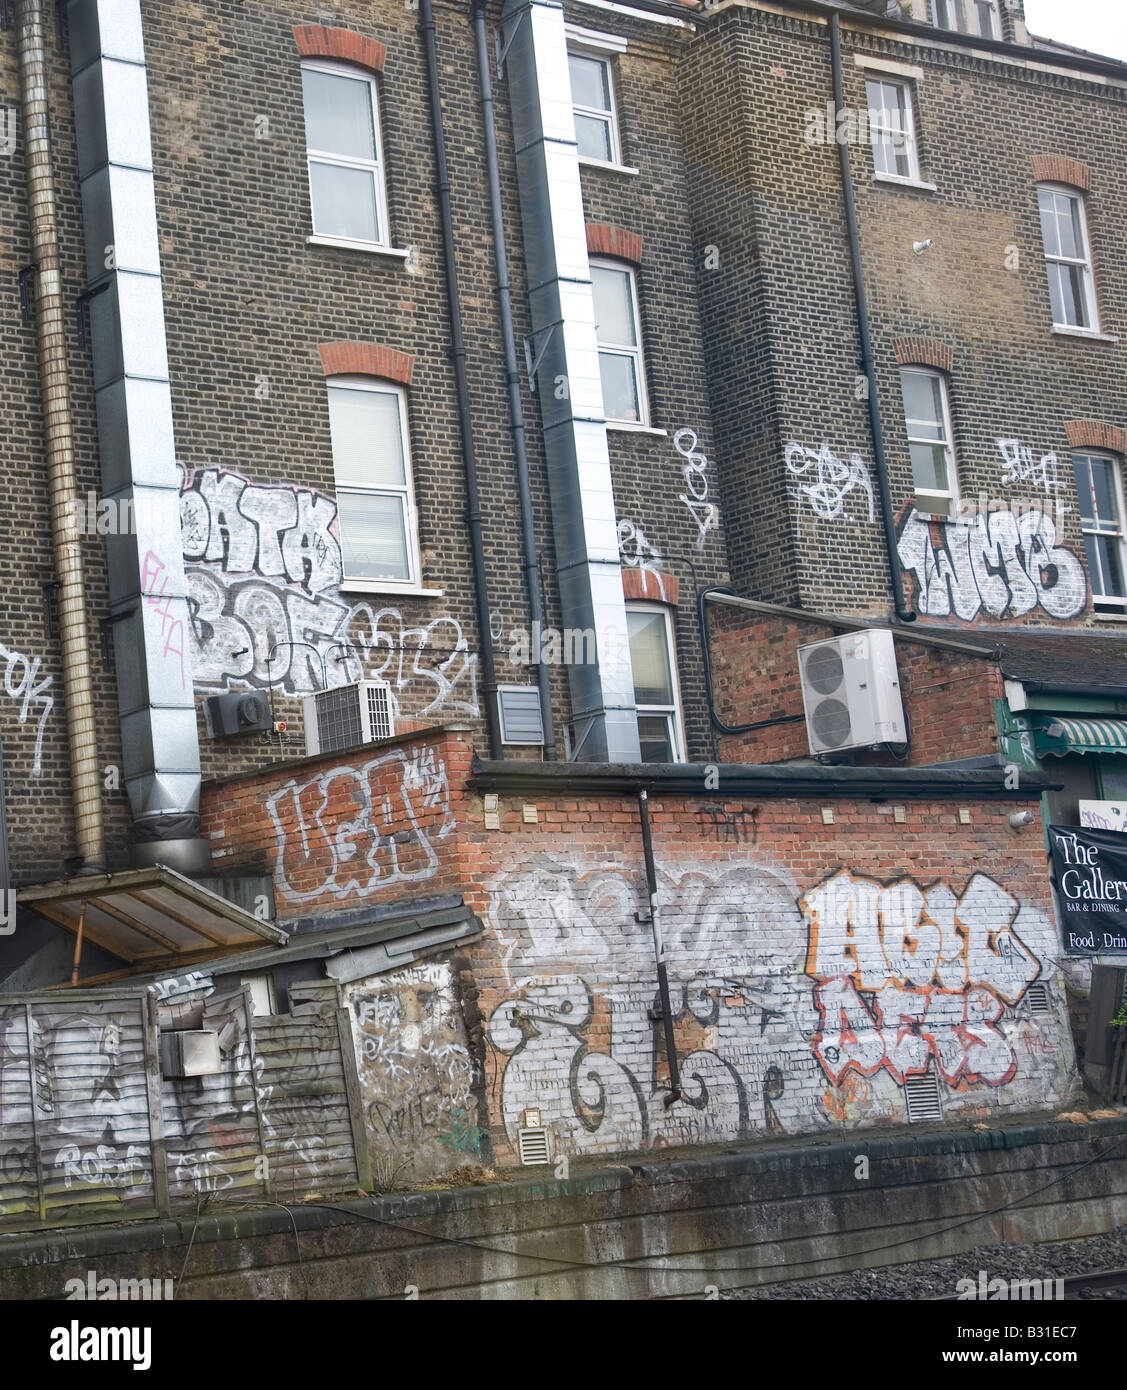 Graffiti found on brick building against rail track of underground in North London Stock Photo